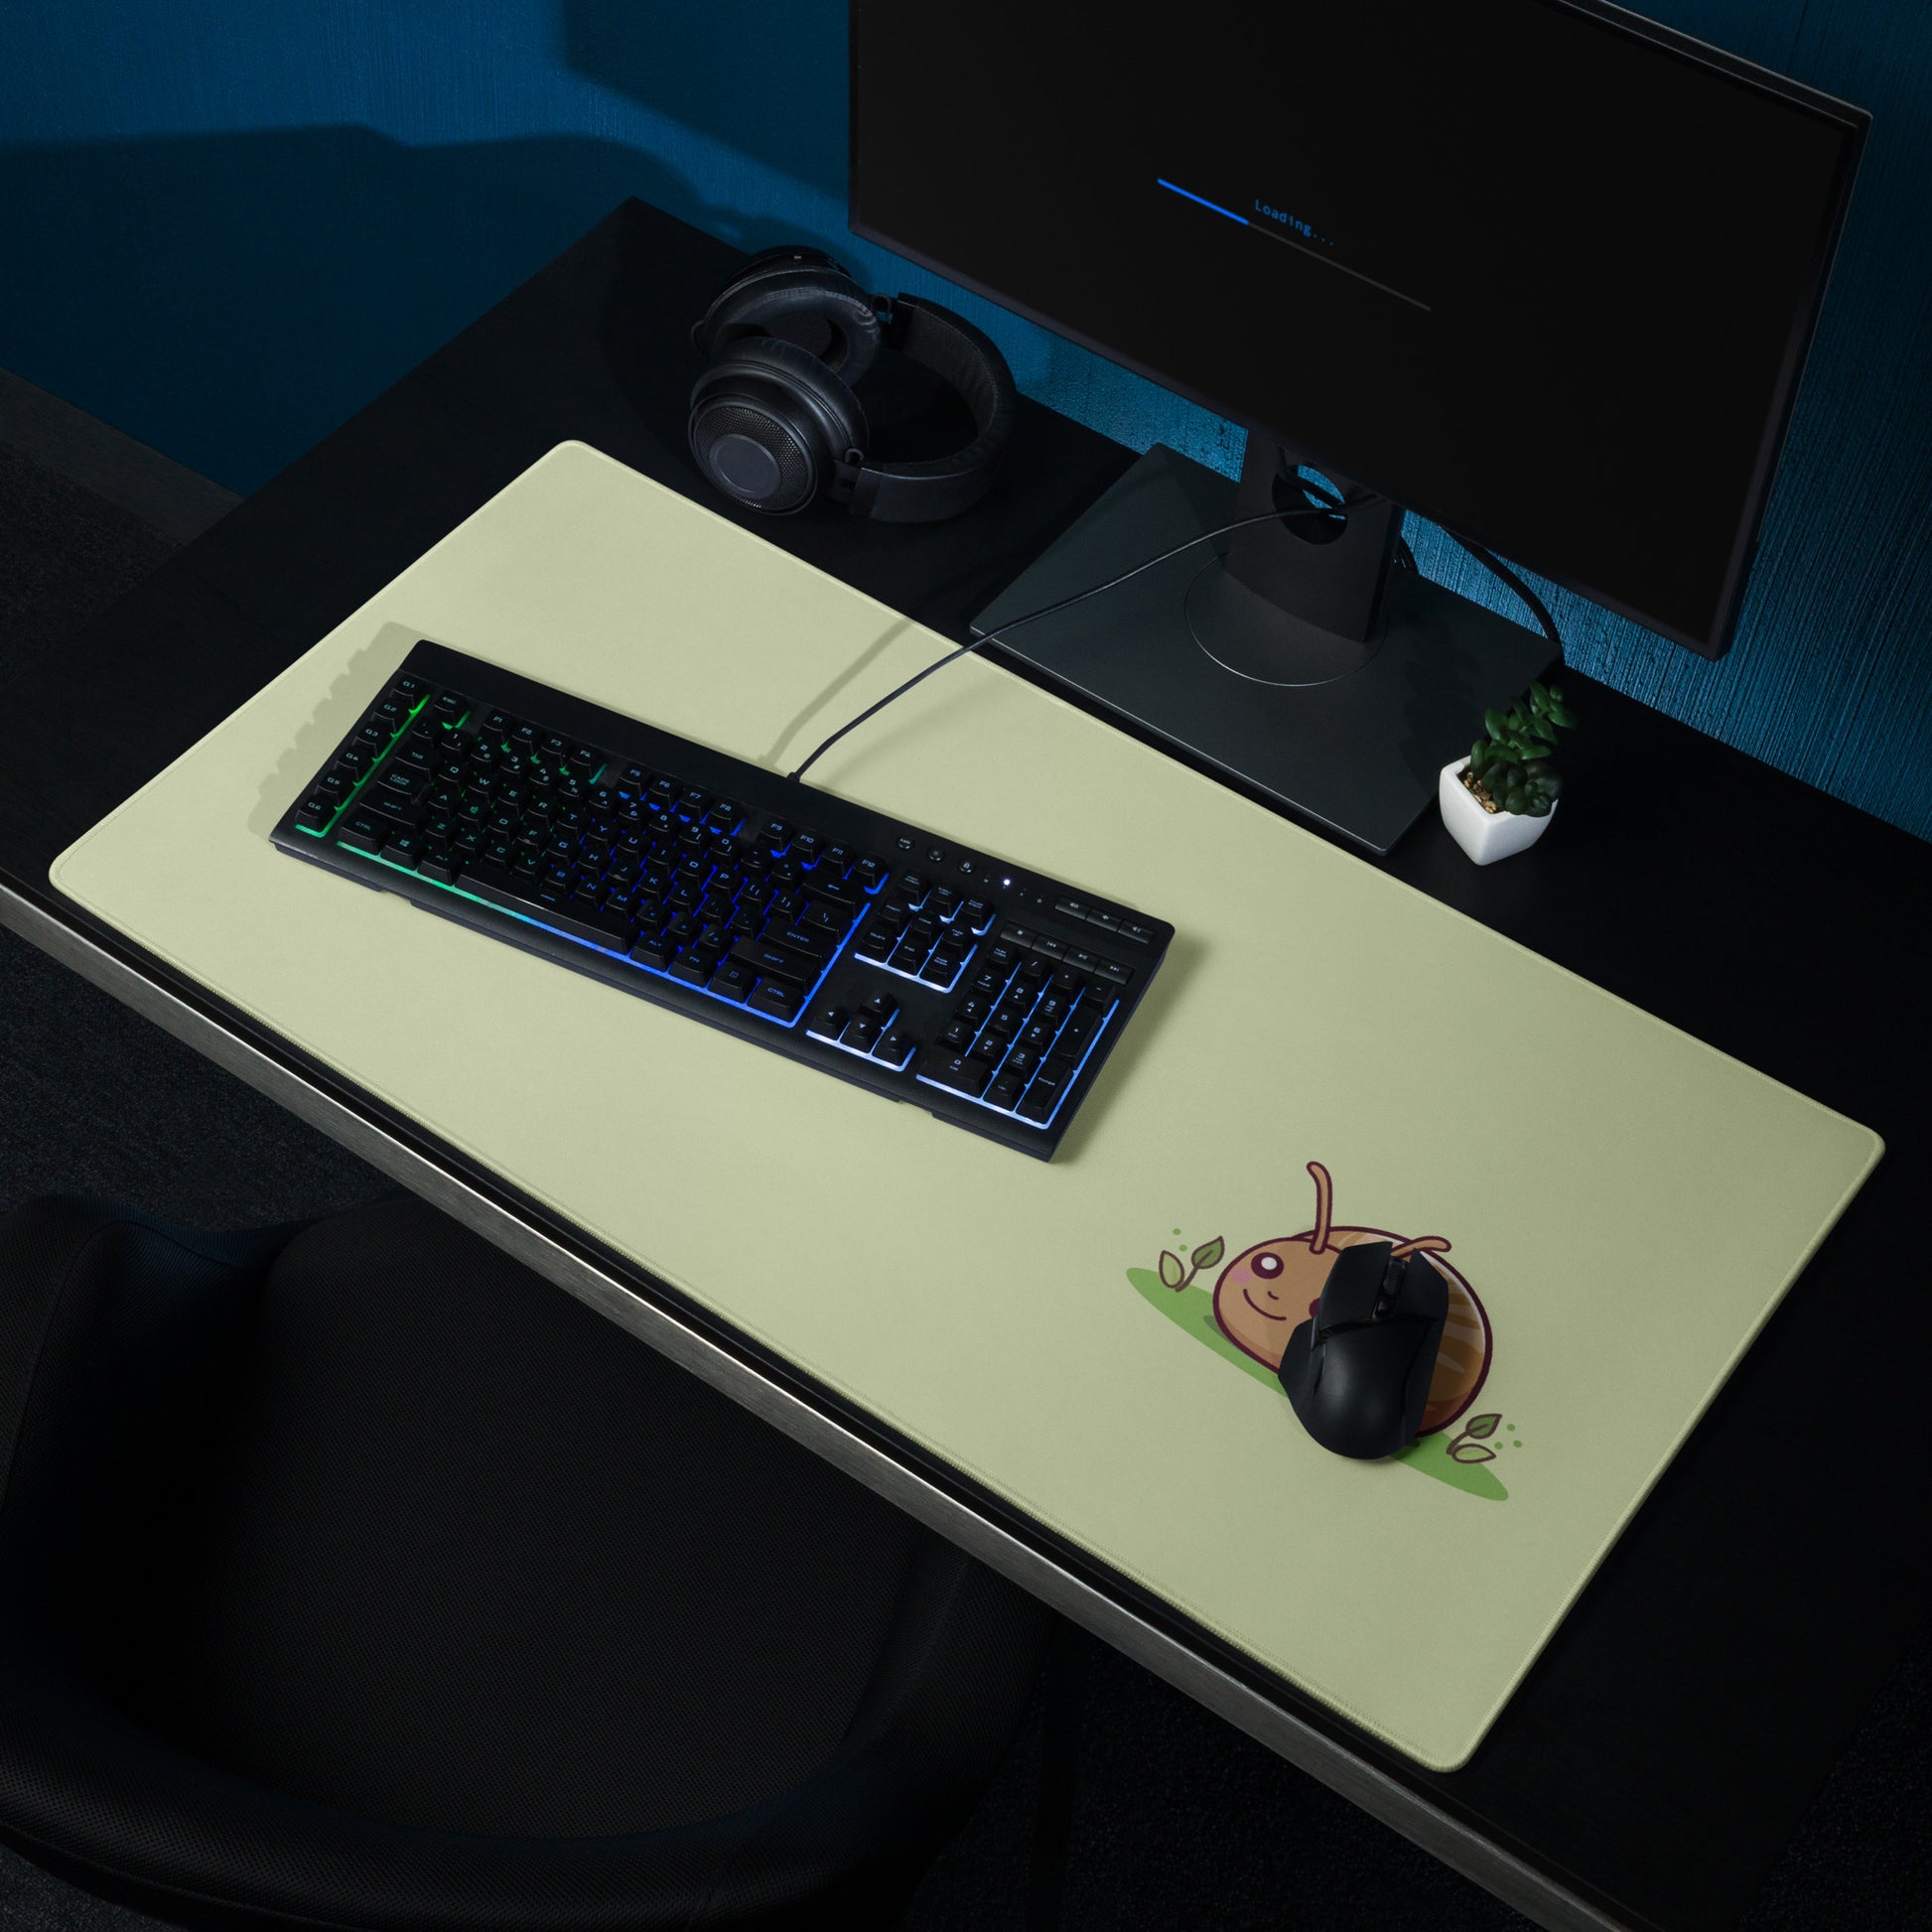 A 36" x 18" desk pad with a cute snail on it shown on a desk setup. Green in color.